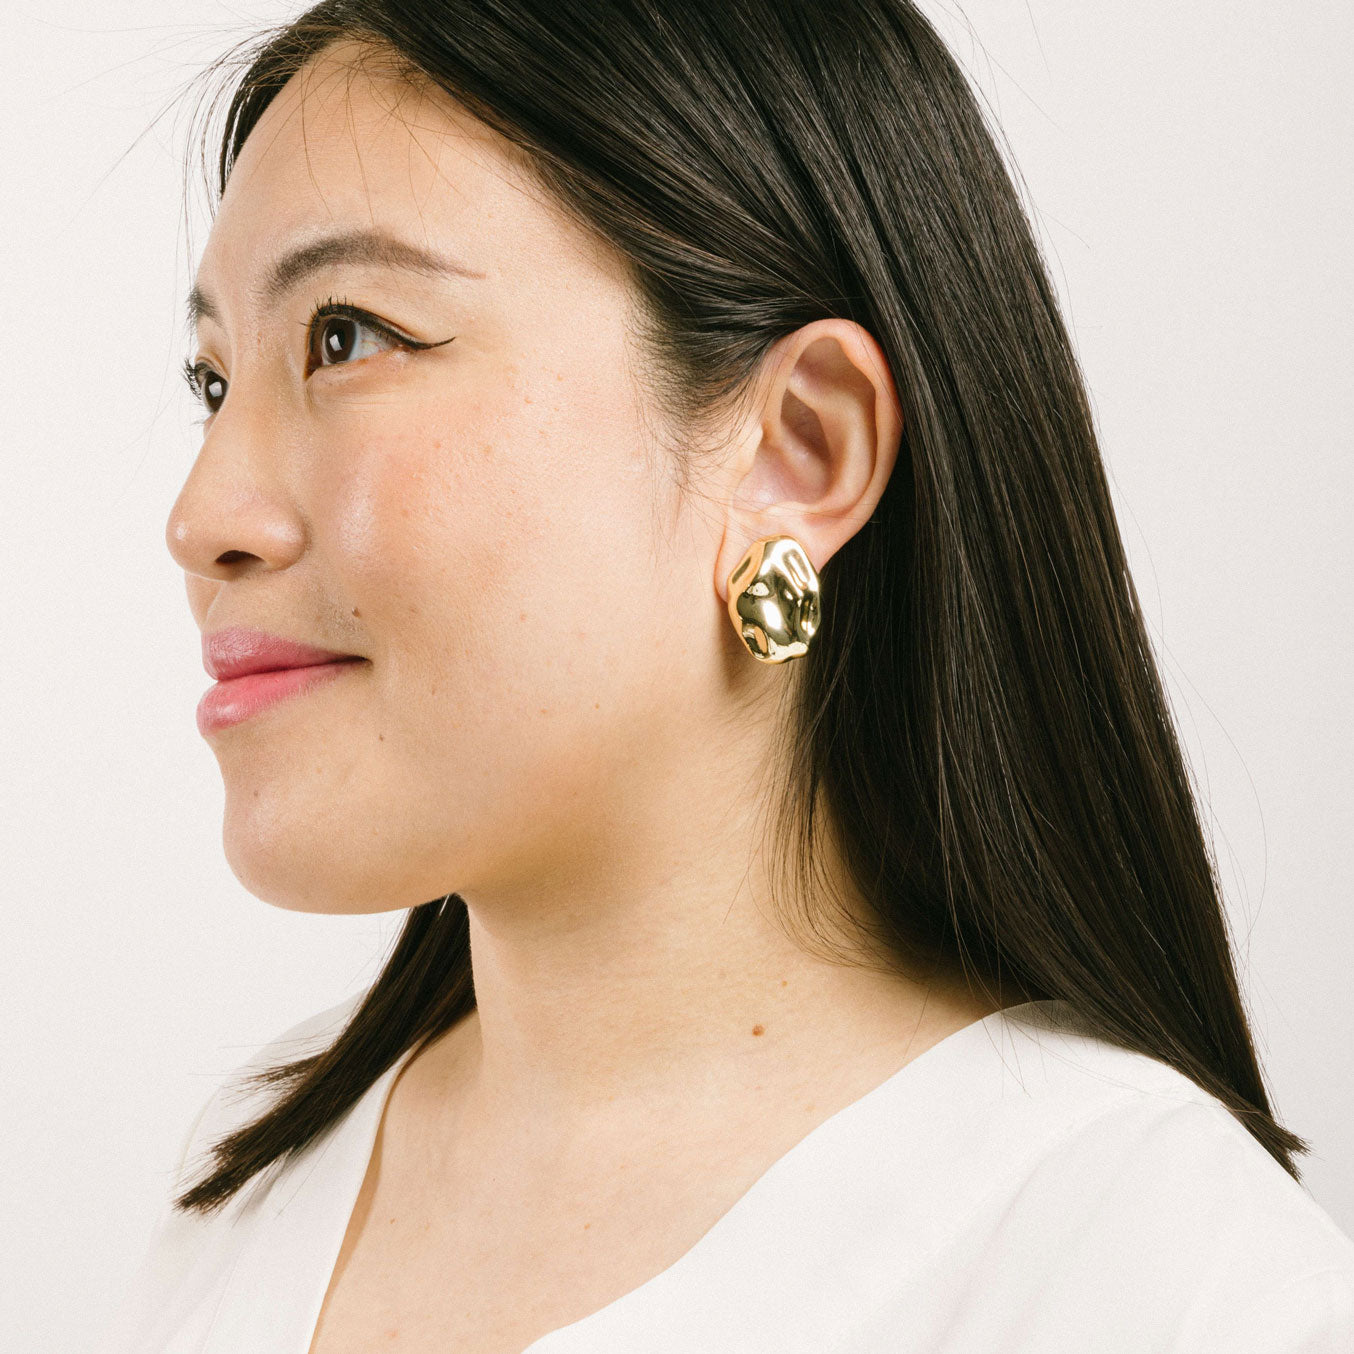 A model wearing the Amaya Clip On Earrings in Gold feature a secure padded clip-on closure type, making them suitable for all ear types.The average comfortable wear duration is 8-12 hours, and the Copper Alloy construction ensures a reliable and secure hold. The item is sold as one pair; adjustable rubber padding is included.